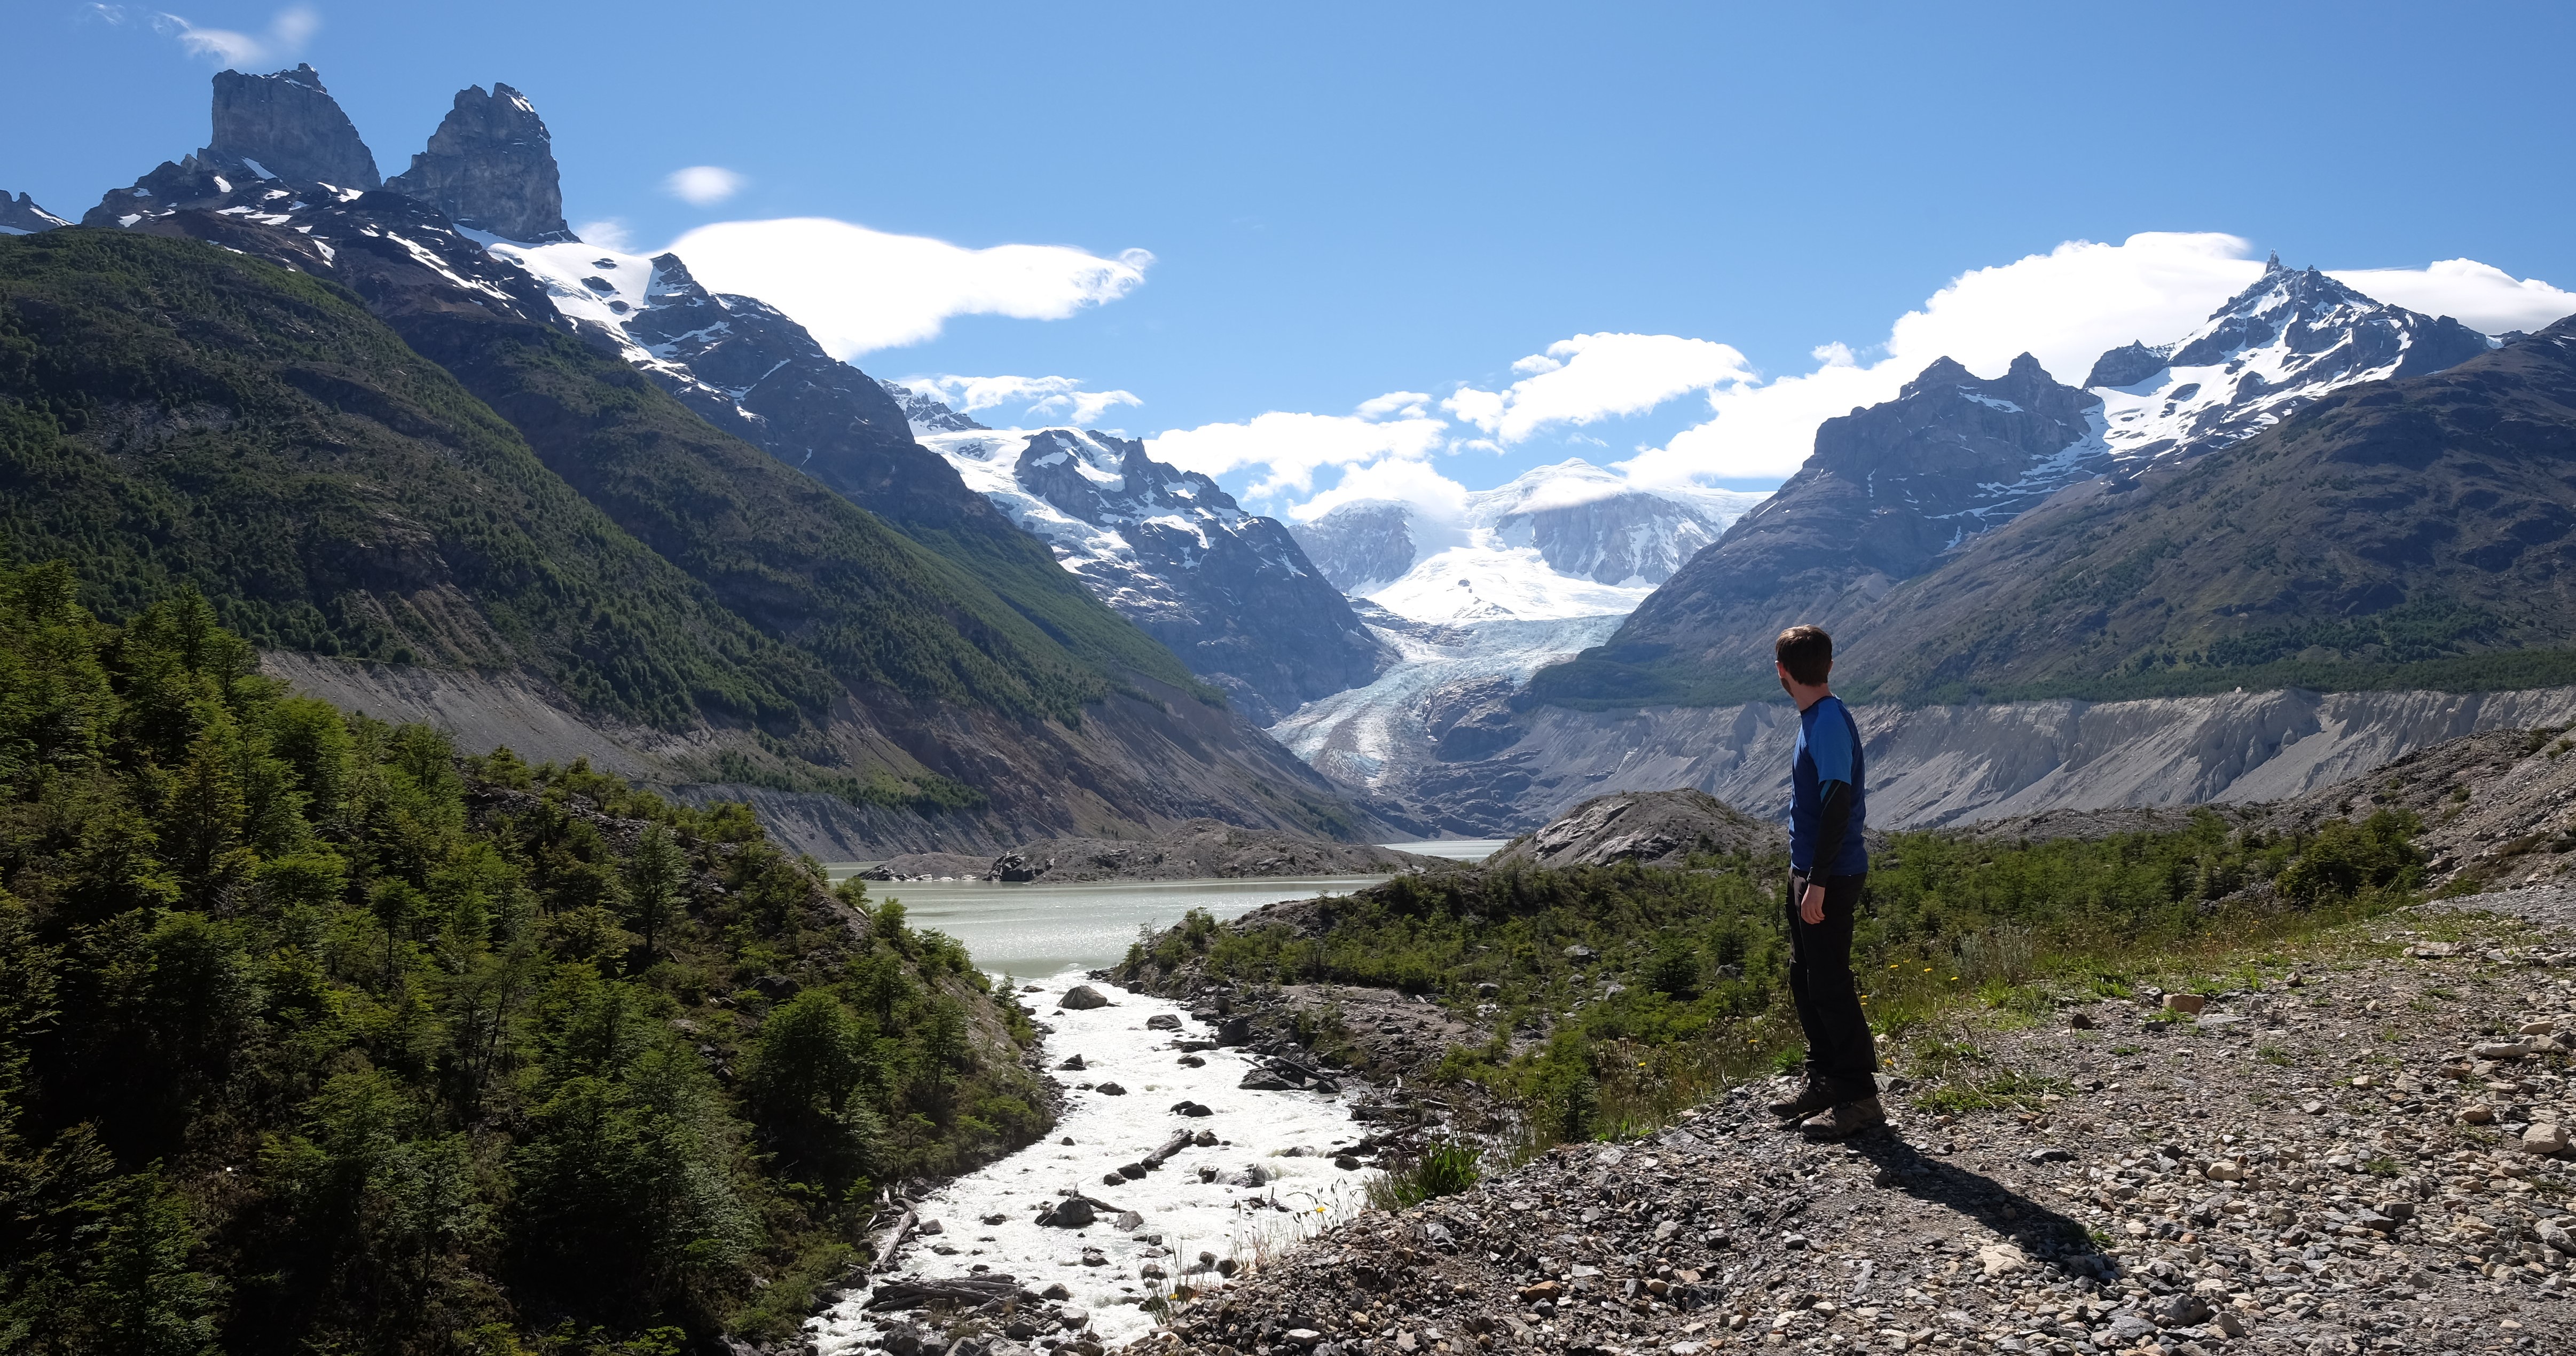 A researcher stands on a mountain, looking across at the Andes and water bodies